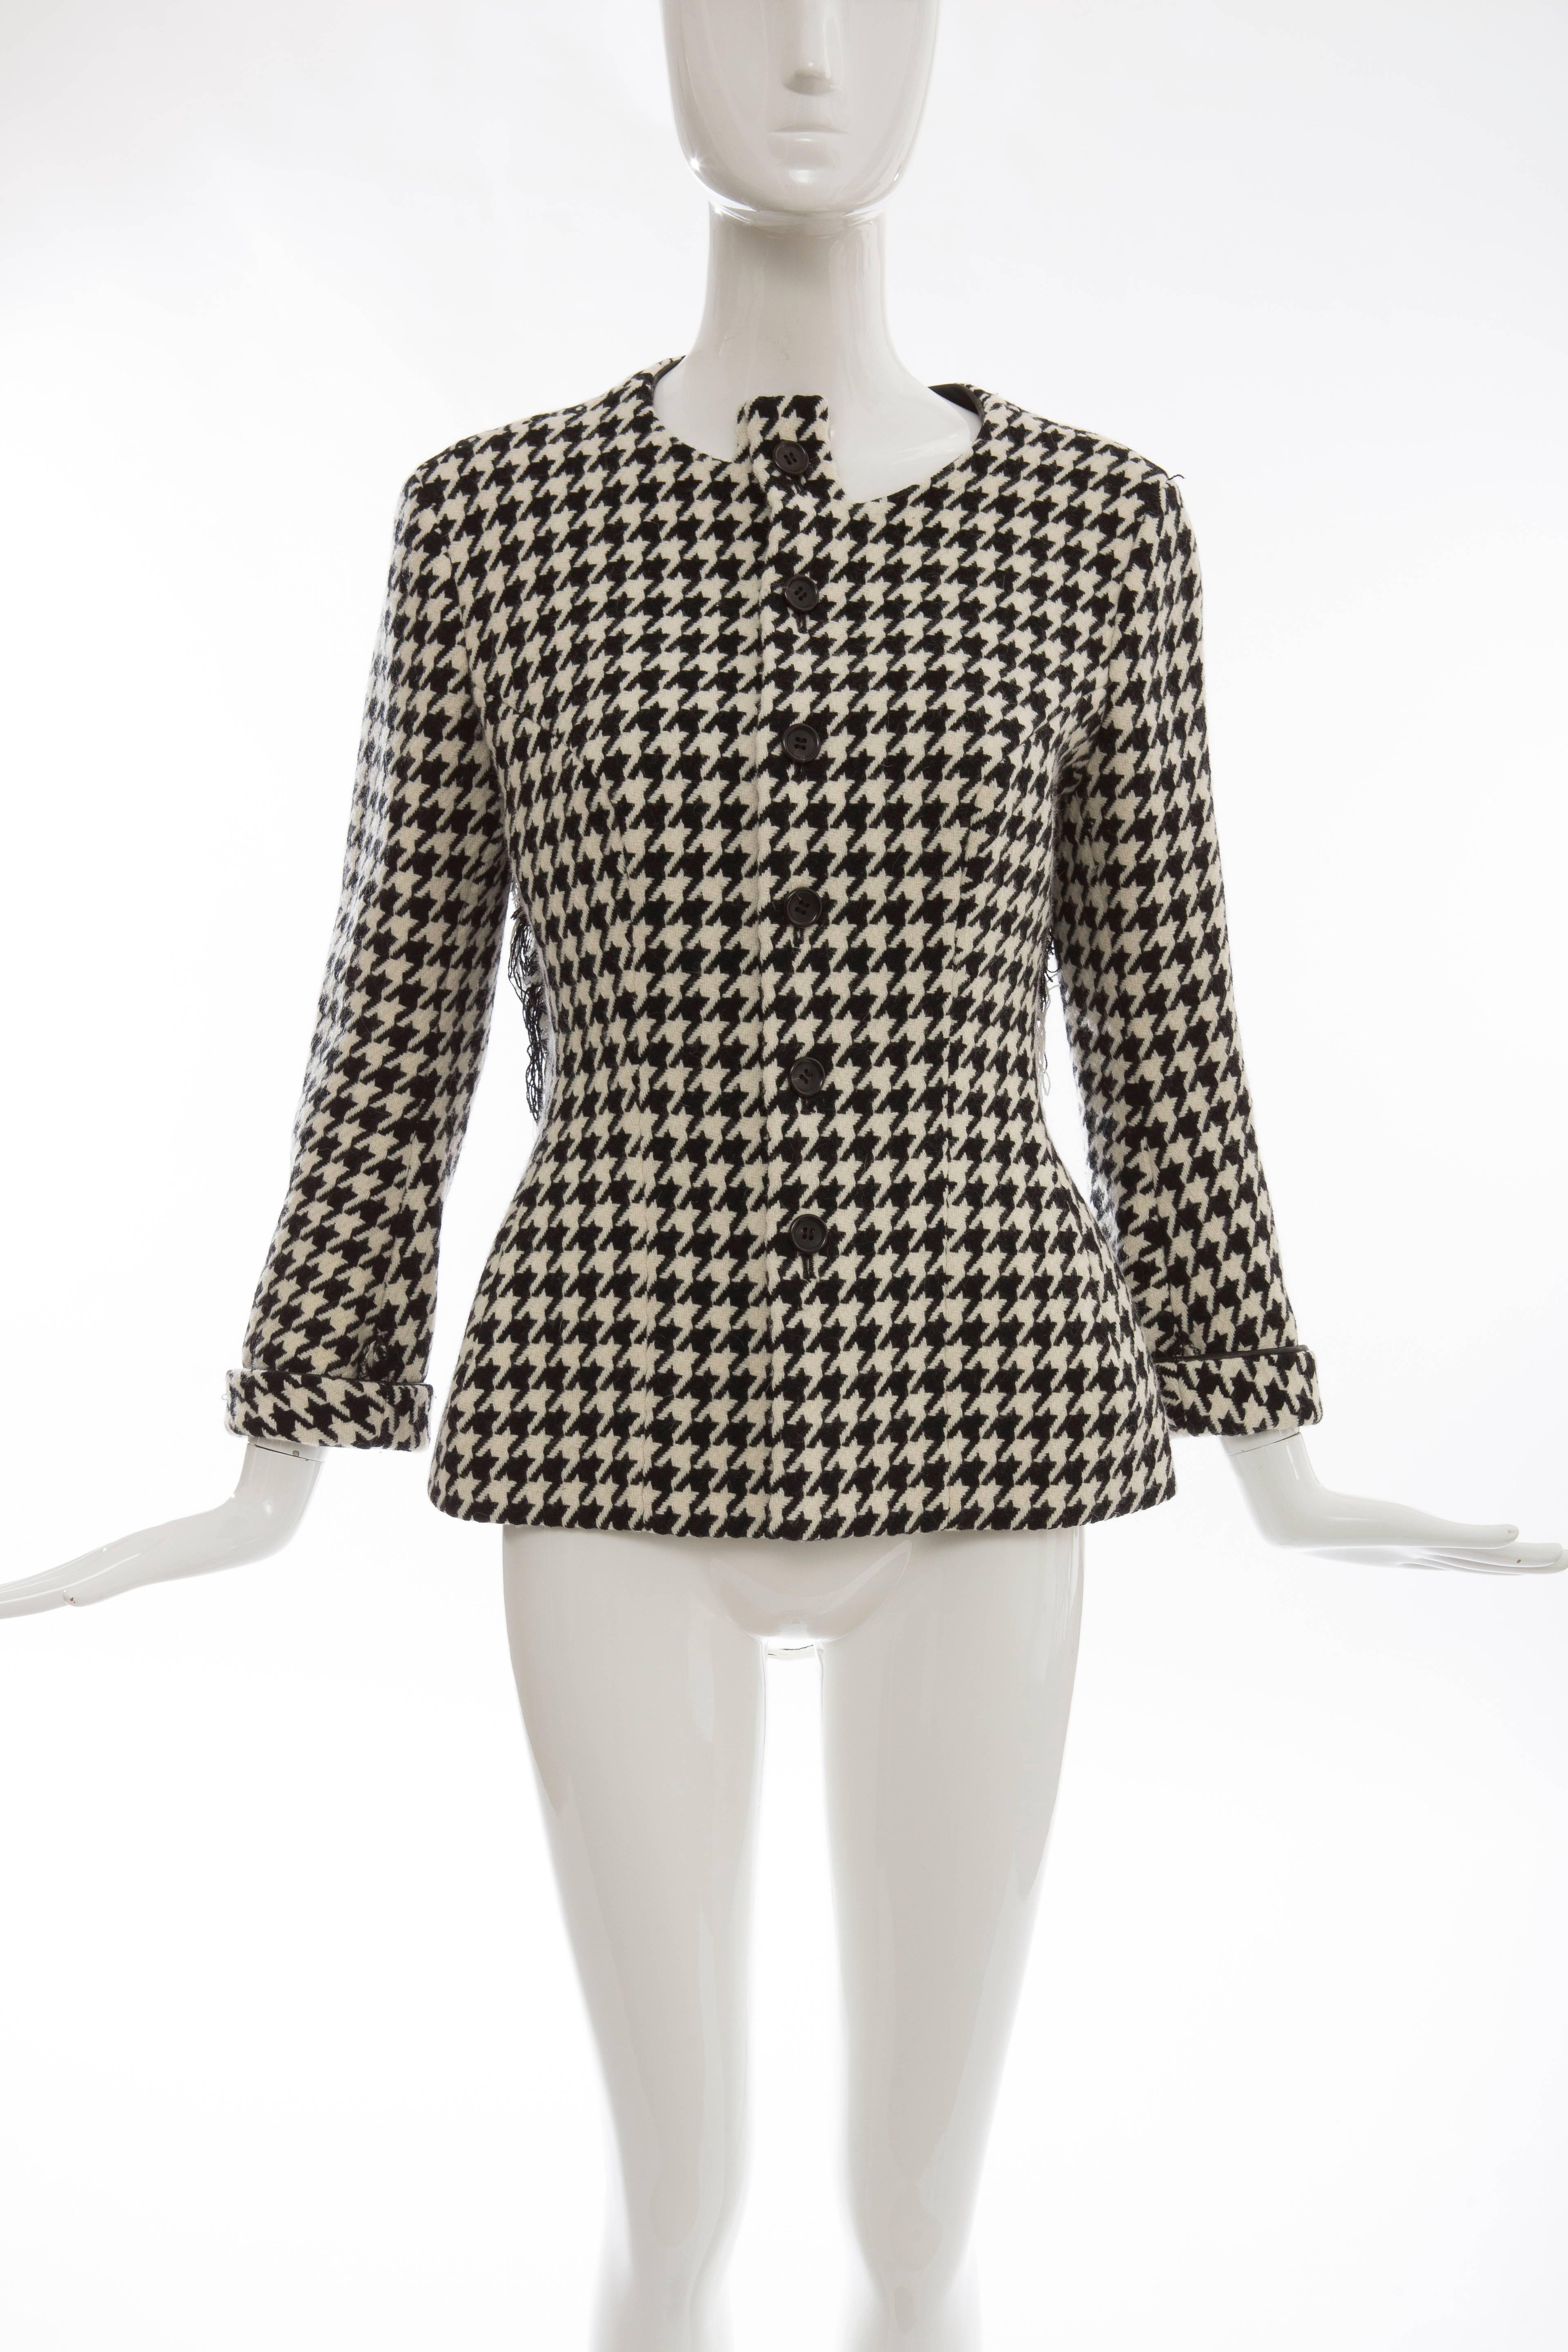 Yohji Yamamoto, Autumn-Winter 2003 wool jacket with Houndstooth pattern throughout, leather trim, fringe trim at back and front button closures. 

Designer size 2.
Bust: 42
Waist: 40
Shoulder: 17
Length: 26
Sleeve: 29